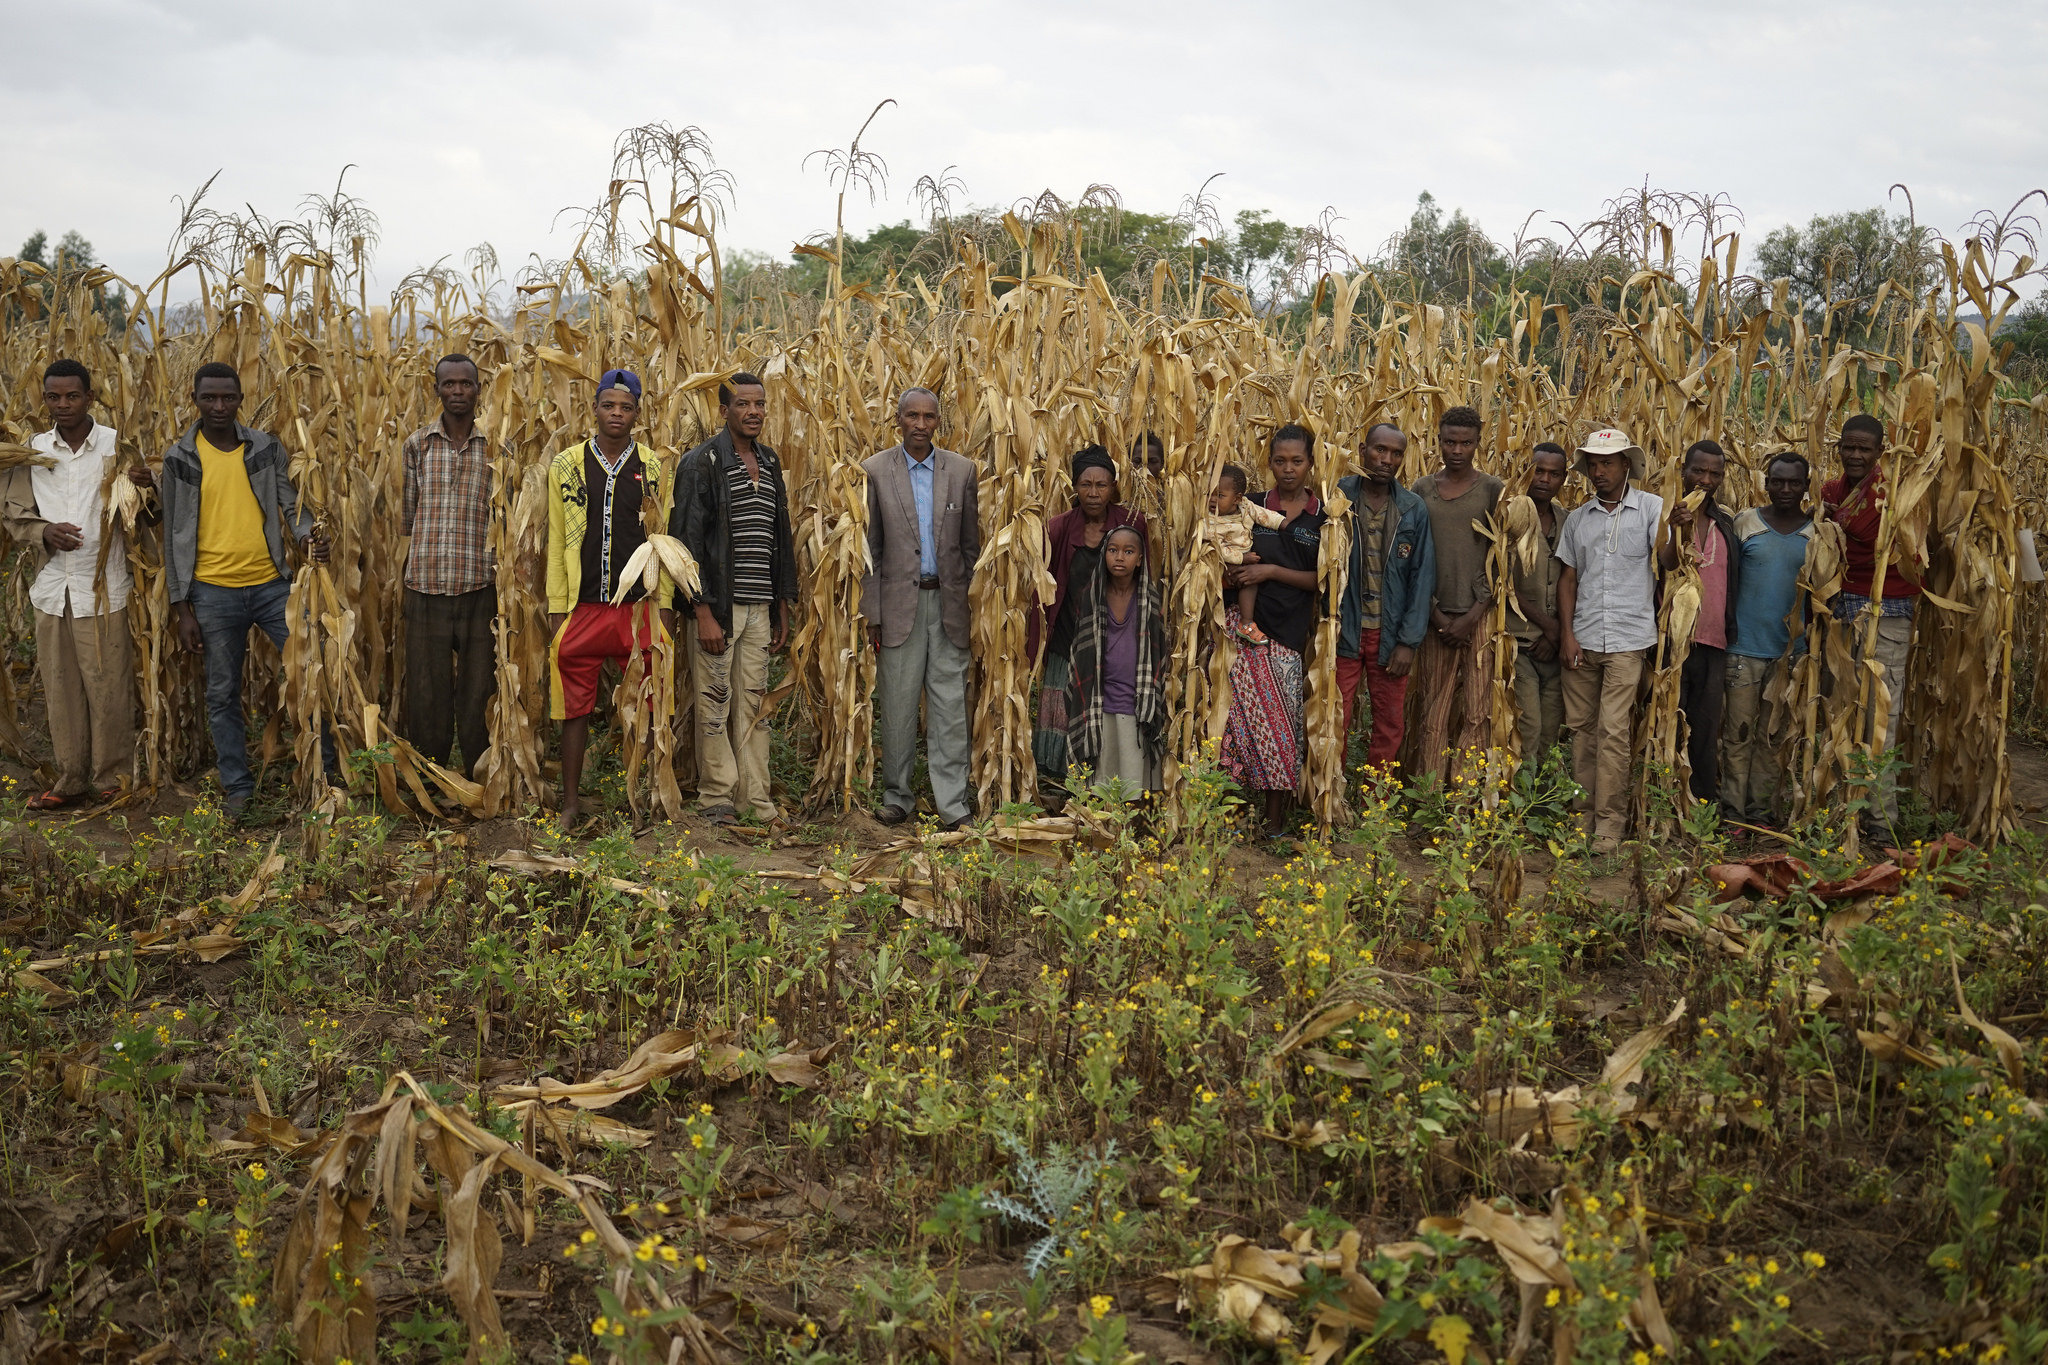 A farmers group stands for a photograph at a demonstration plot of drought-tolerant (DT) maize in the village of Lobu Koromo, in Ethiopia’s Hawassa Zuria district. (Photo: P. Lowe/CIMMYT)